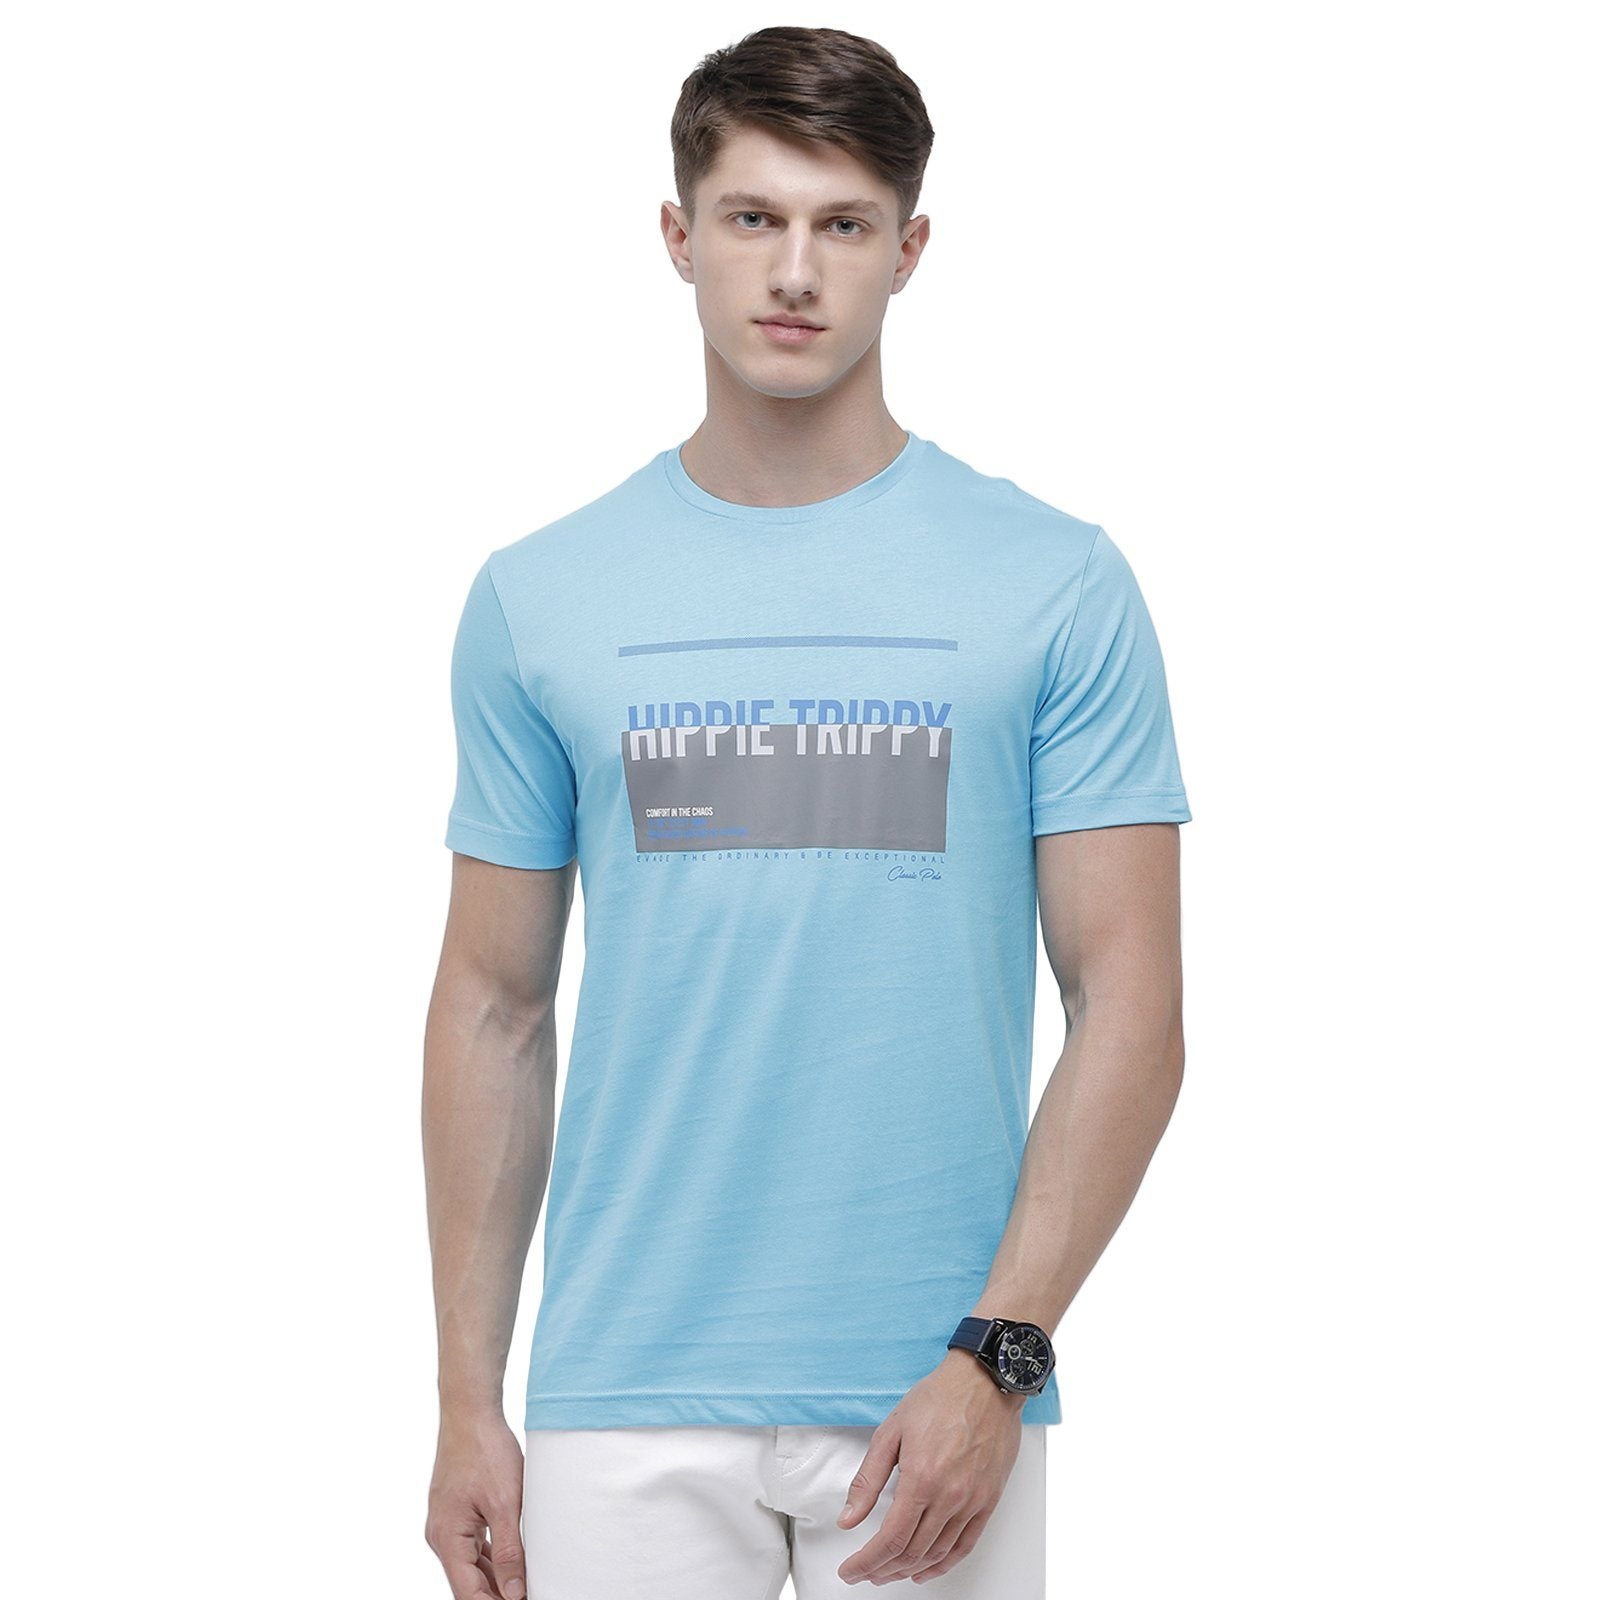 Classic polo Men's Round Neck Half Sleeve Turquoise 100% Cotton T-Shirt BALENO - 368 A SF C T-shirt Classic Polo 